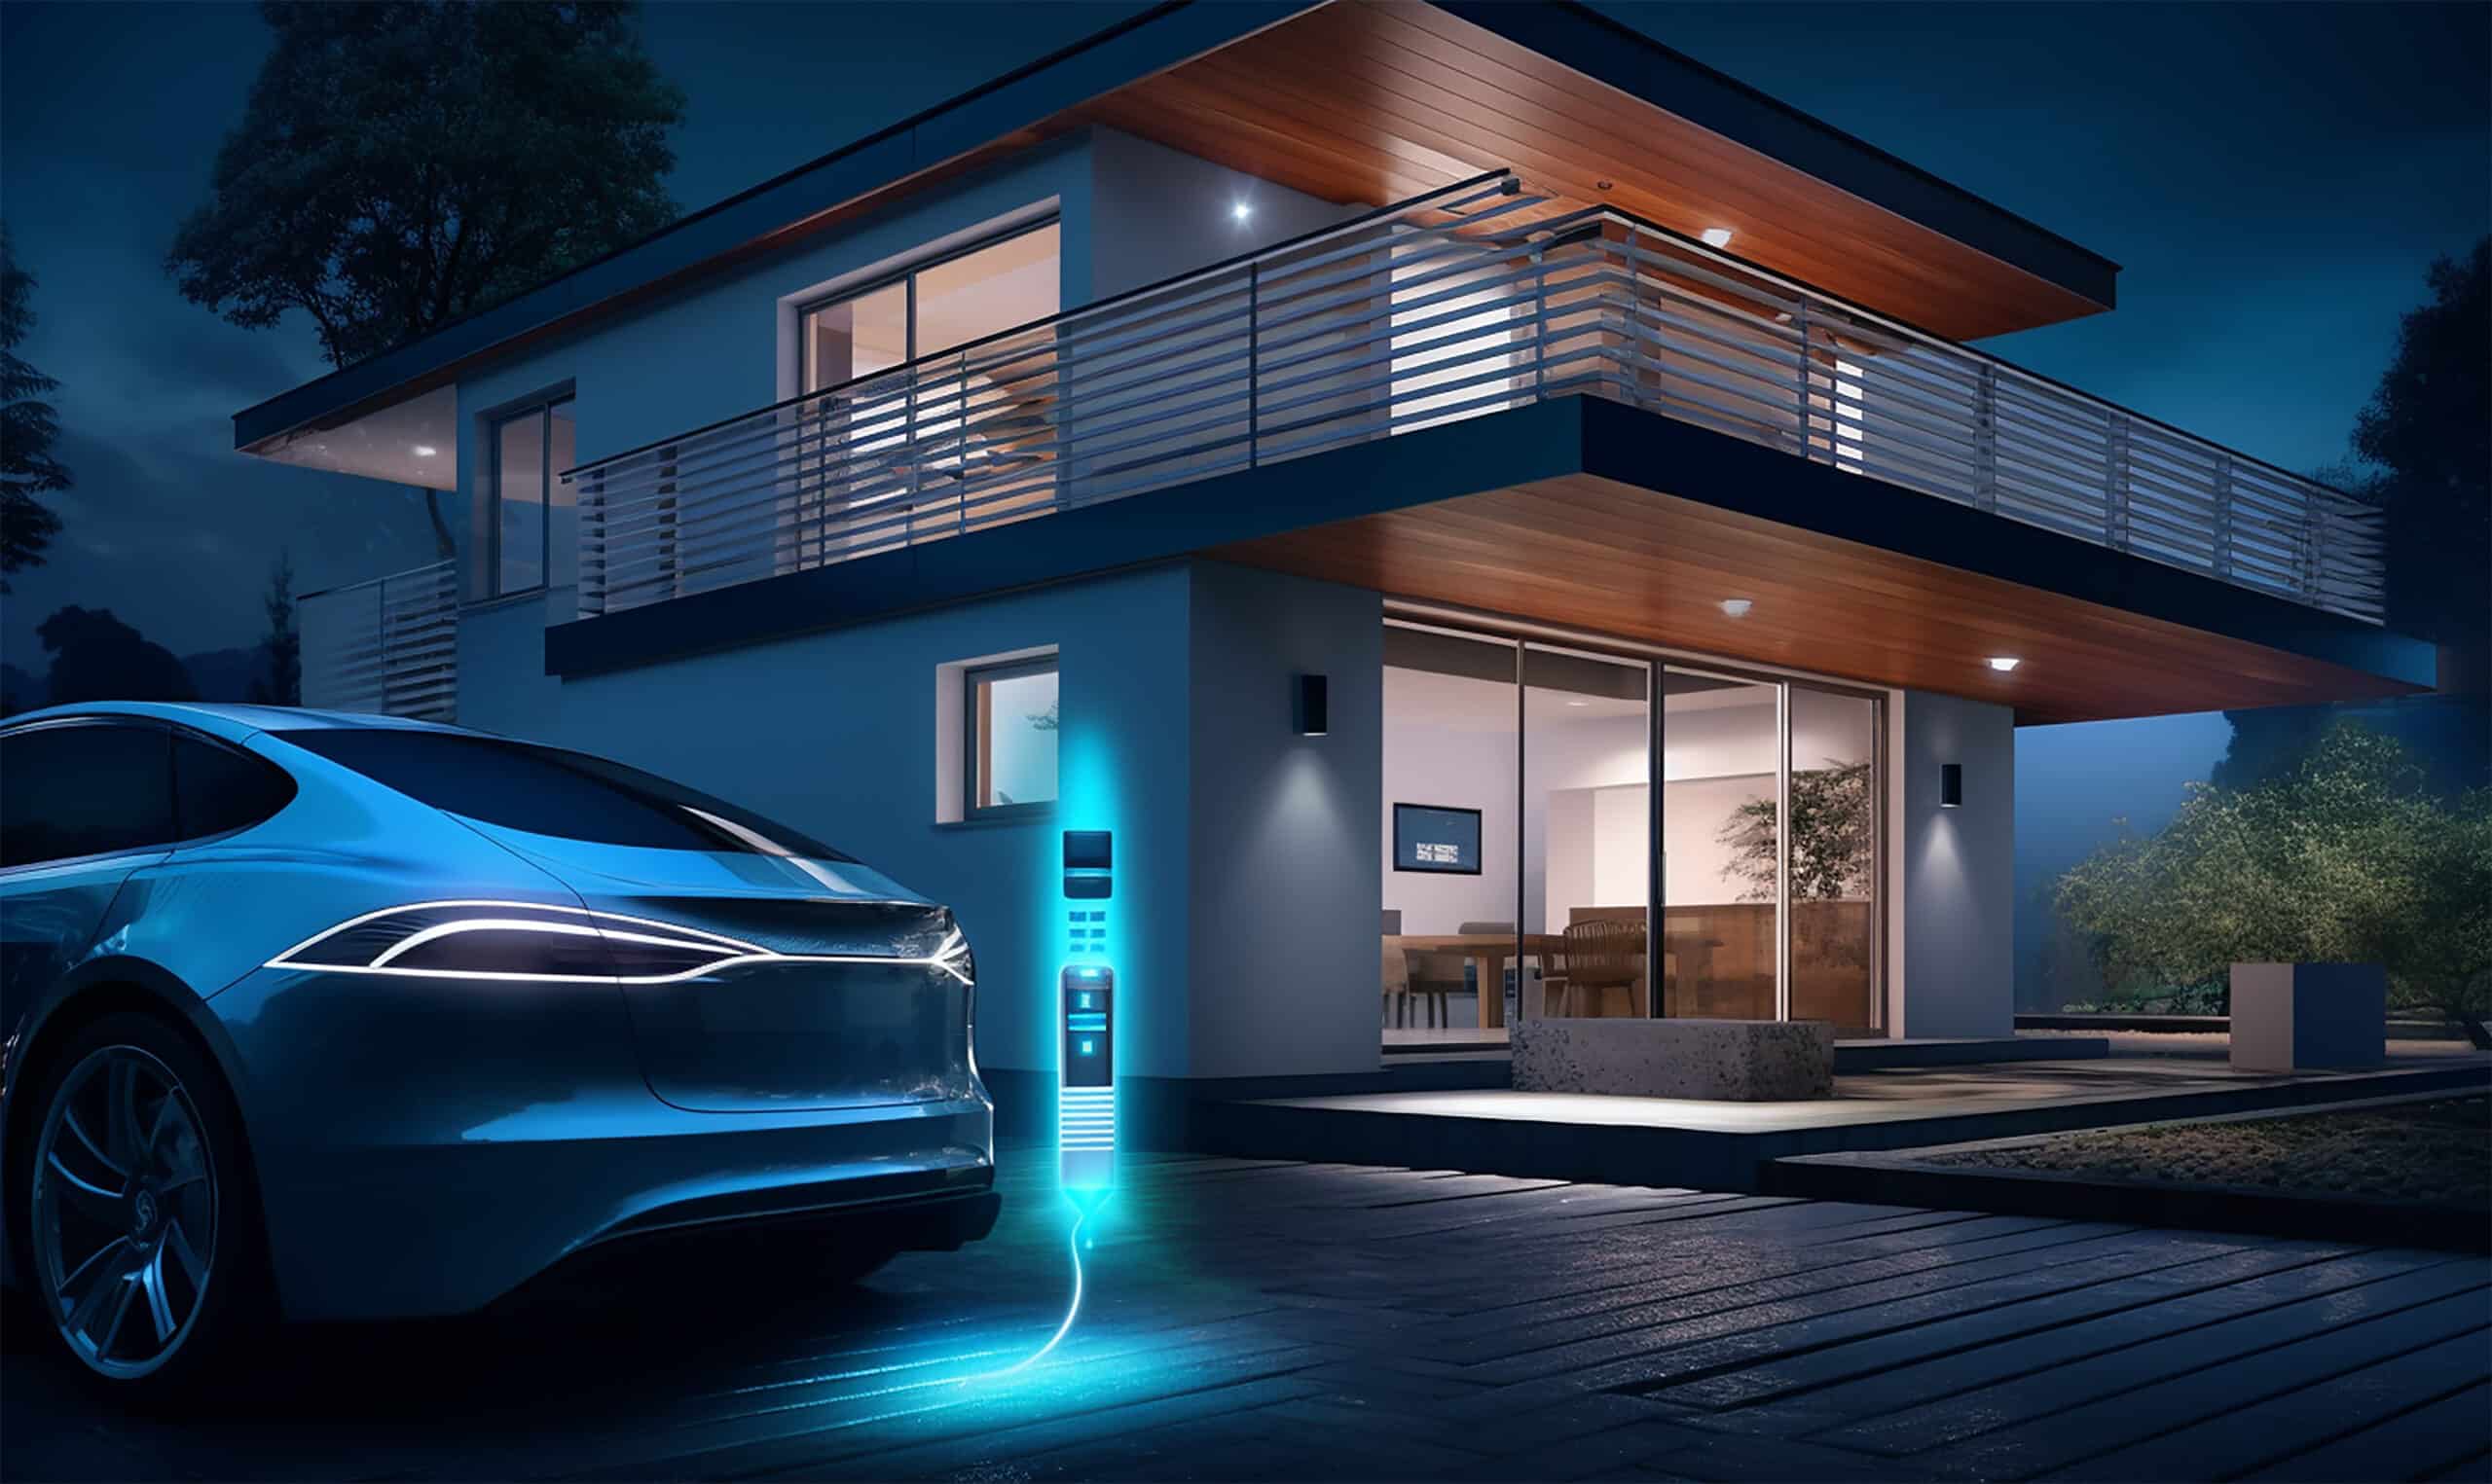 www.appr.com : How long to charge an electric vehicle at home?